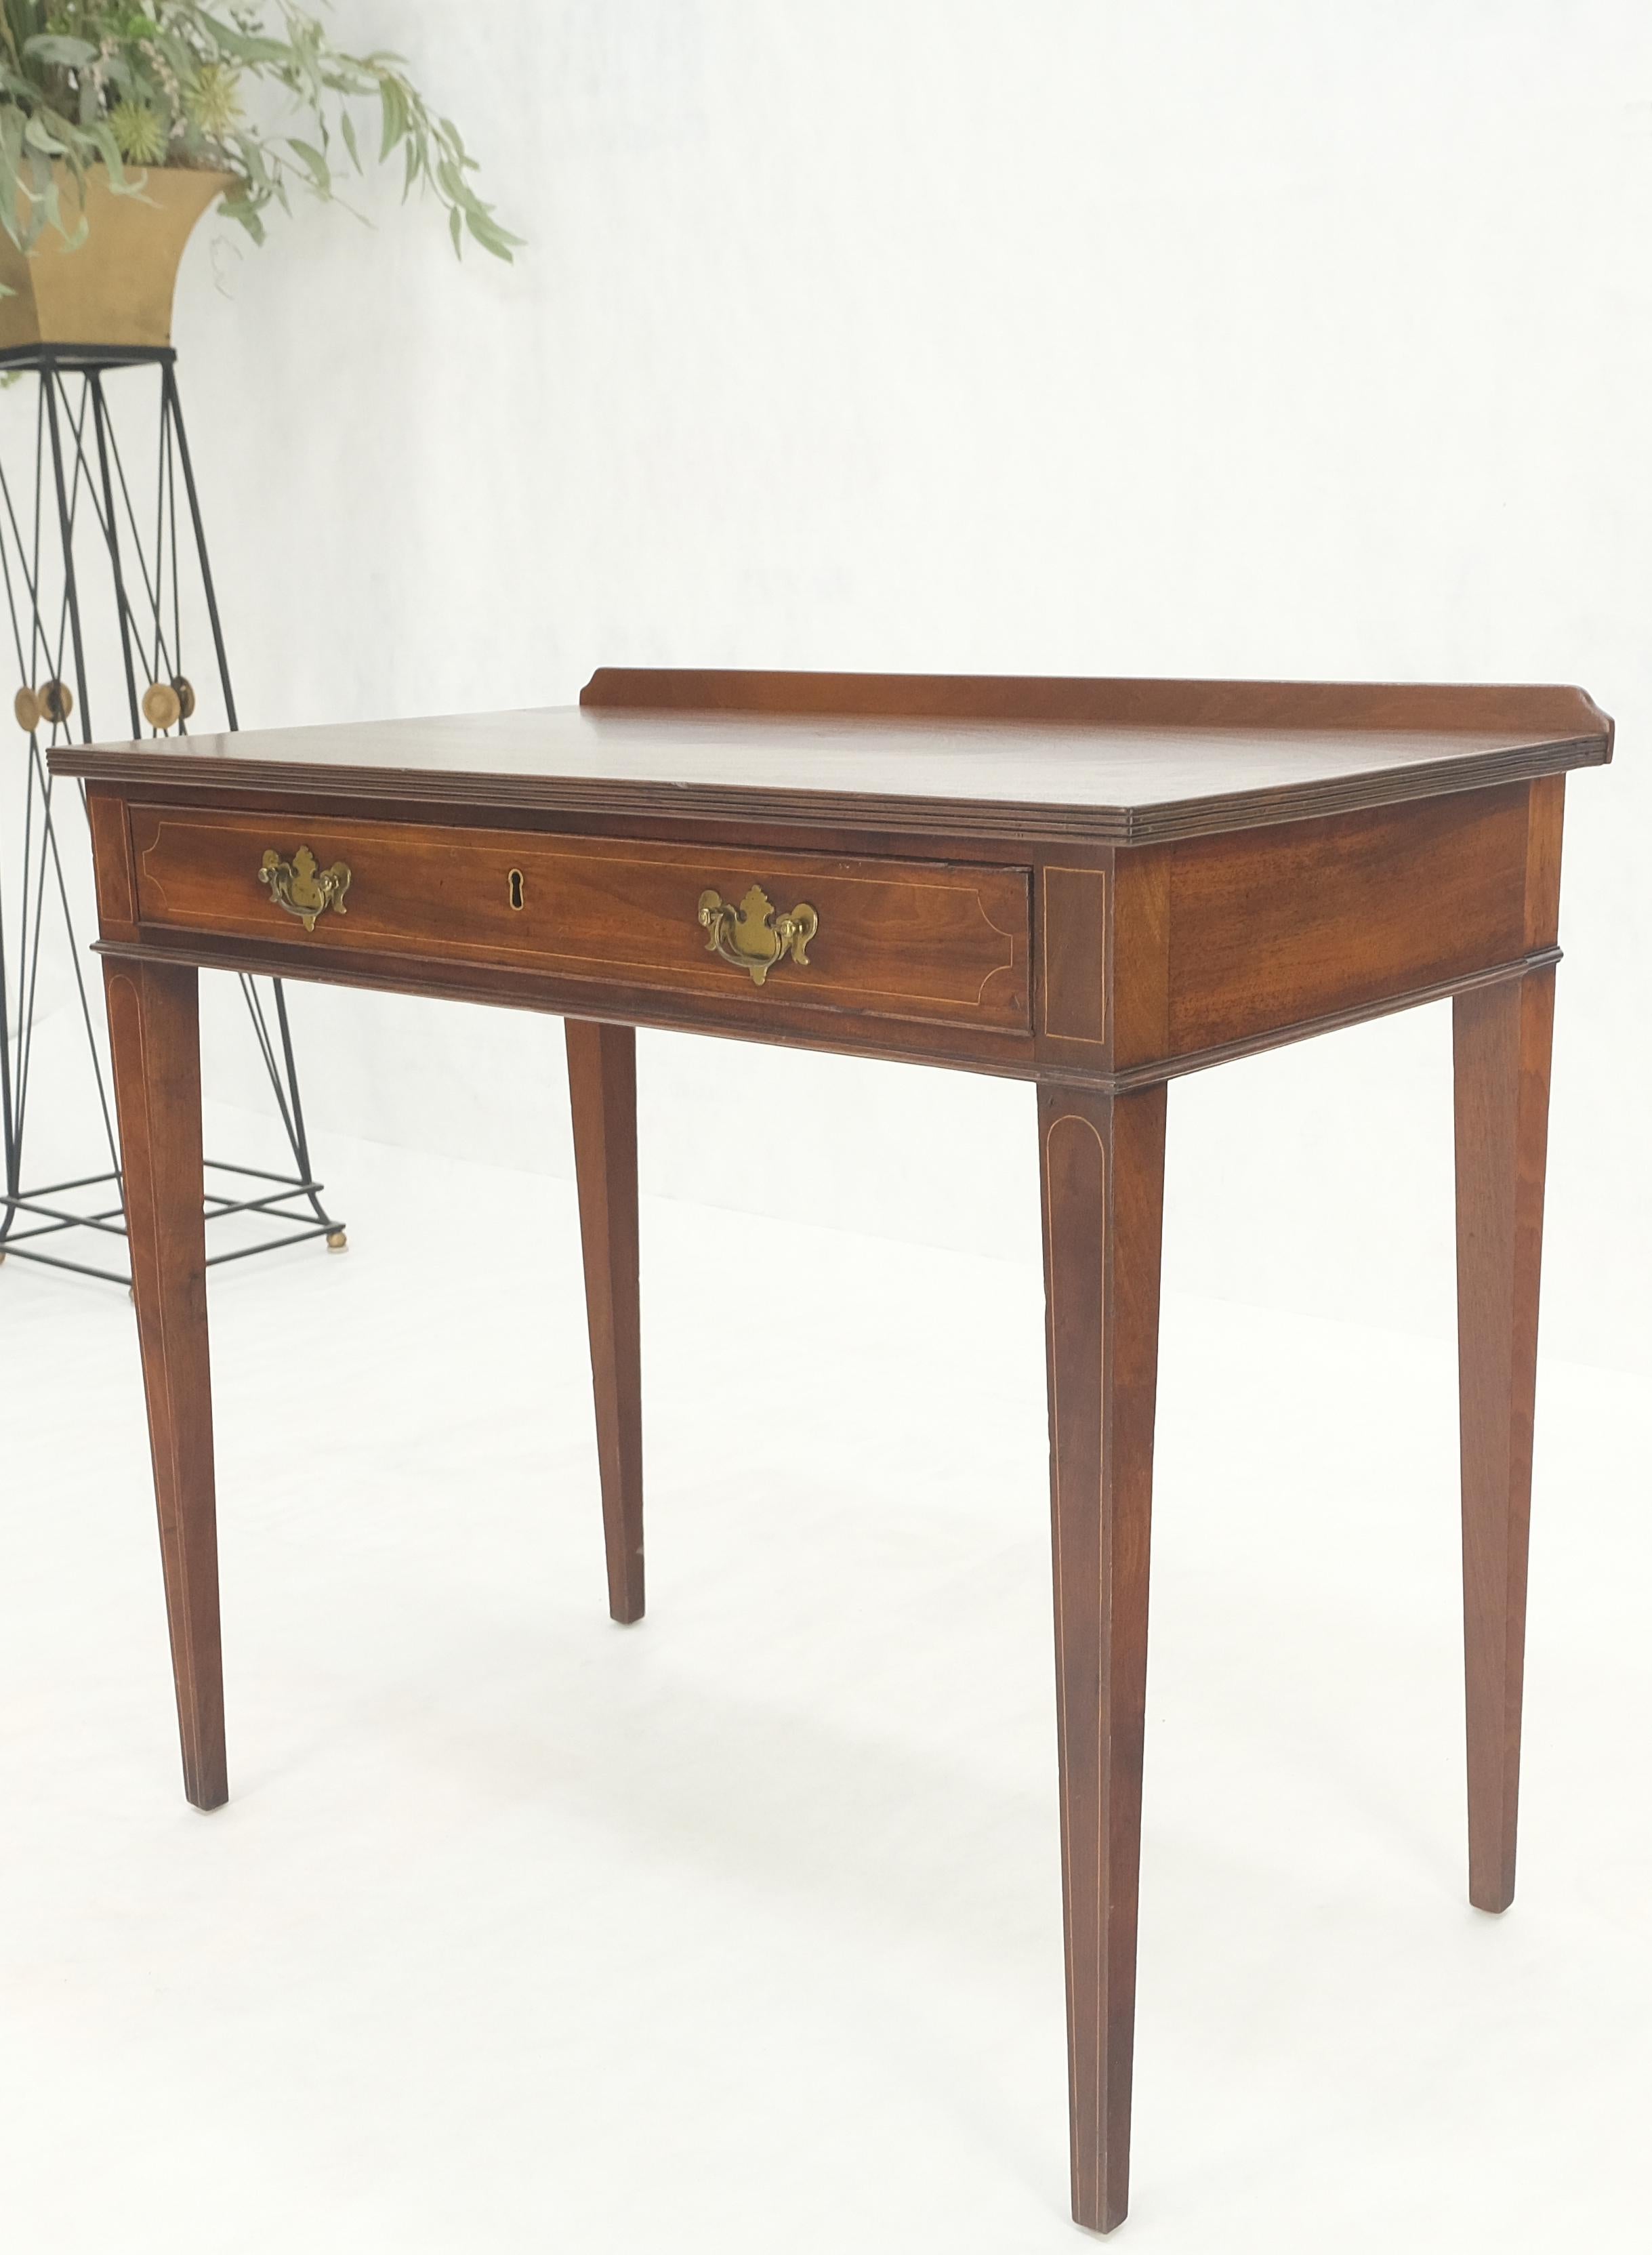 Américain c.1880 Fine One Drawer Inlayed Solid Crotch Mahogany Top Console Table MINT ! en vente